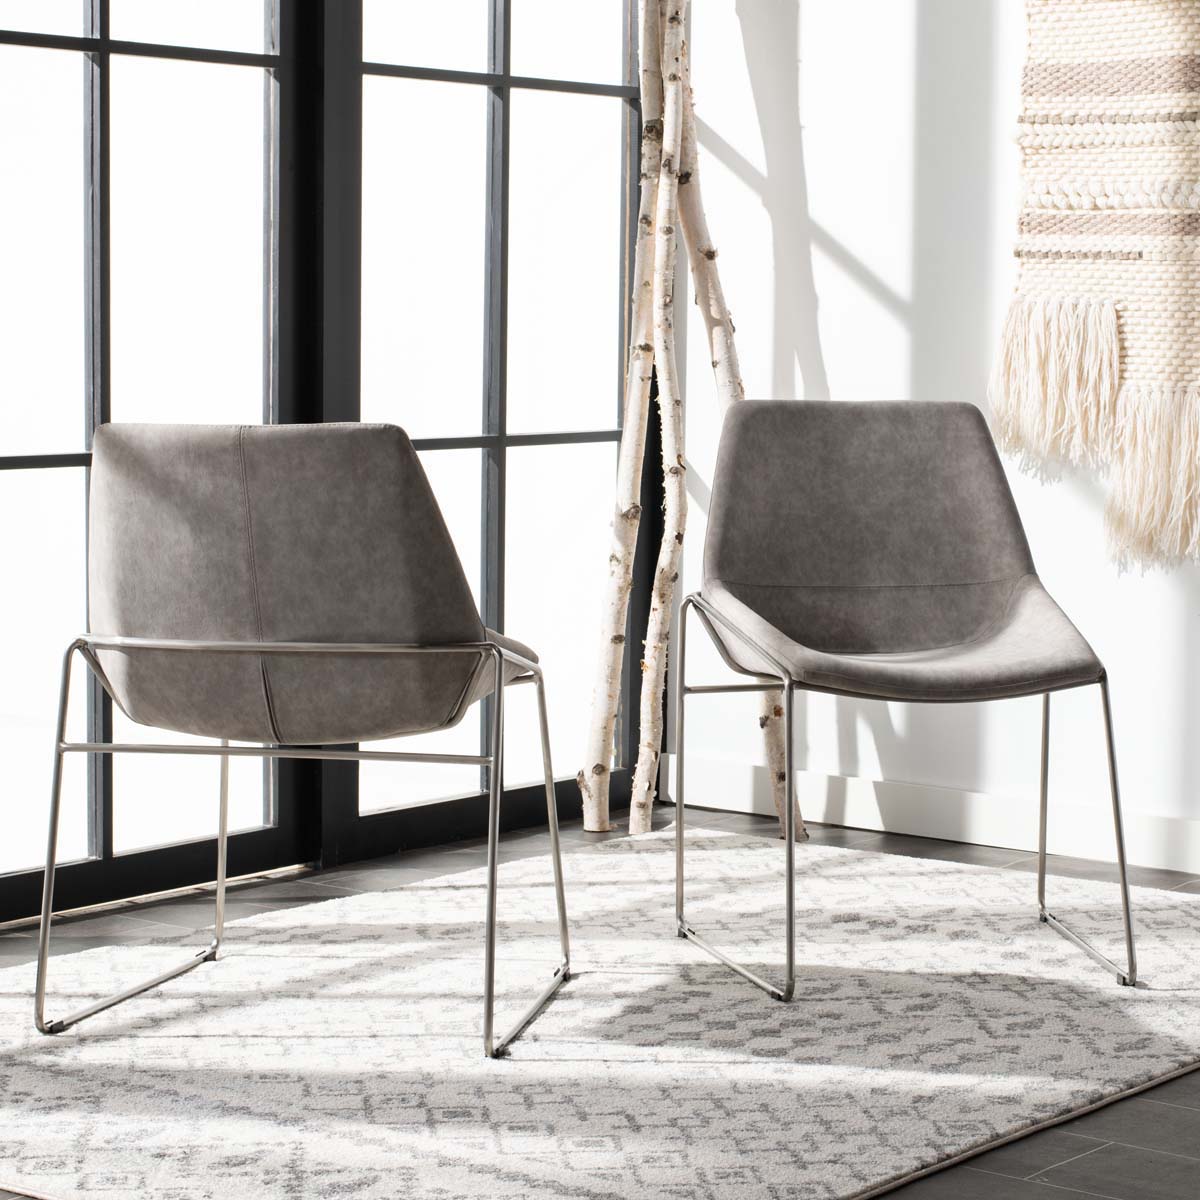 Safavieh Alexis Mid Century Dining Chair (Set of 2), DCH3000 - Stone Grey Pu/Silver